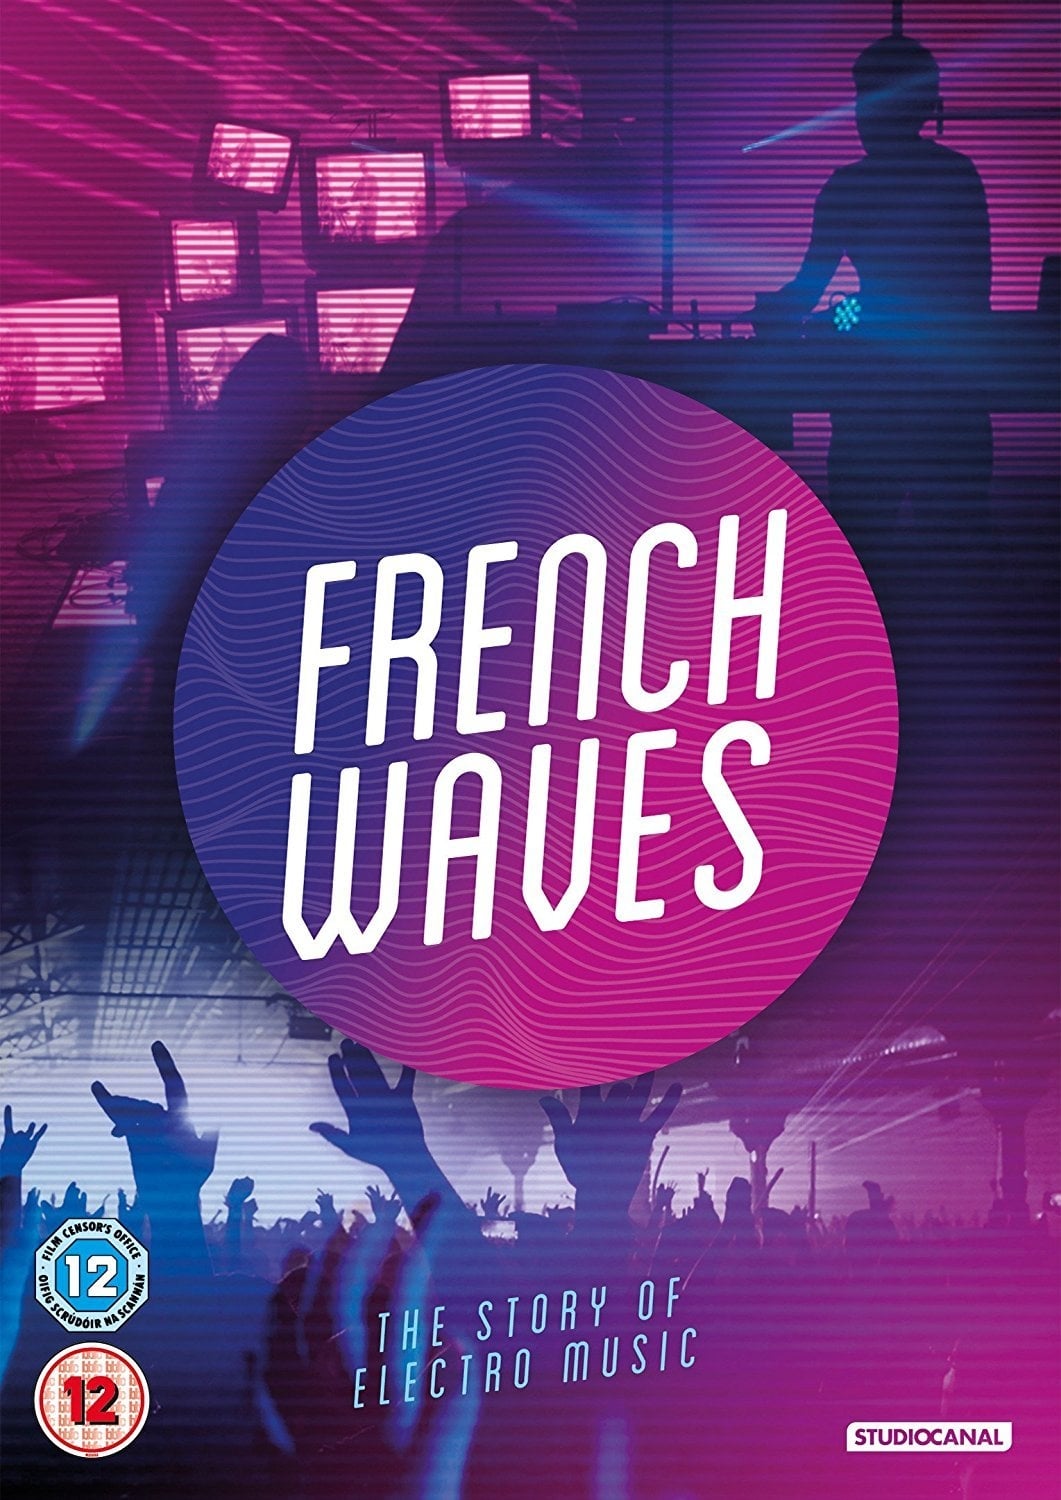 French Waves